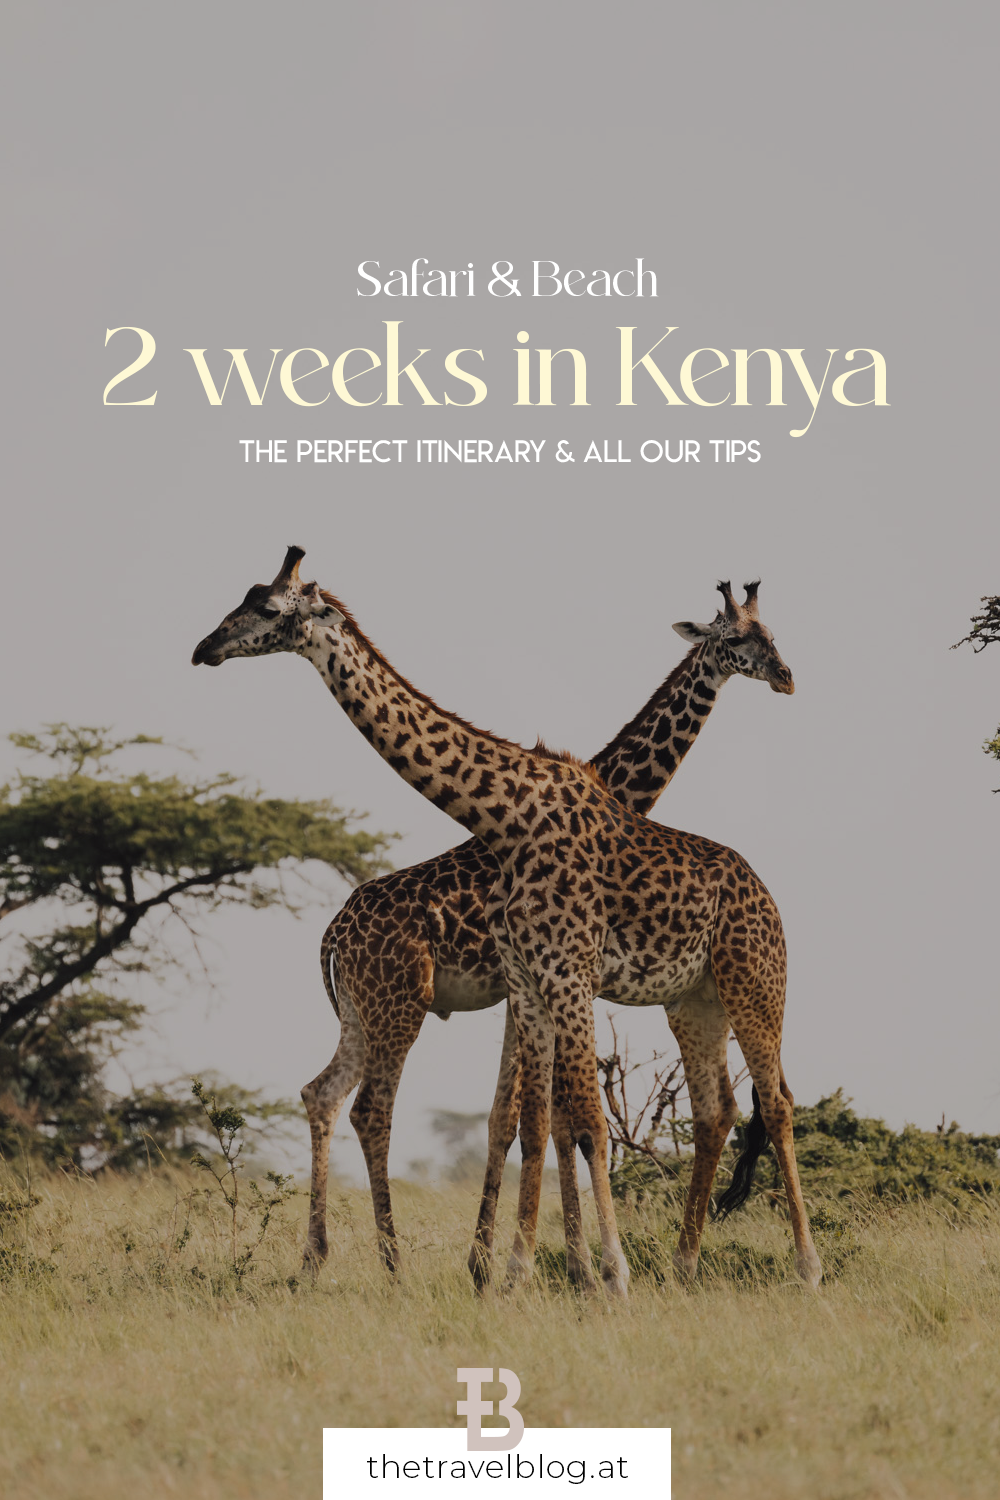 2 weeks in Kenya - Safari and beach itinerary with all our tips for a perfect trip